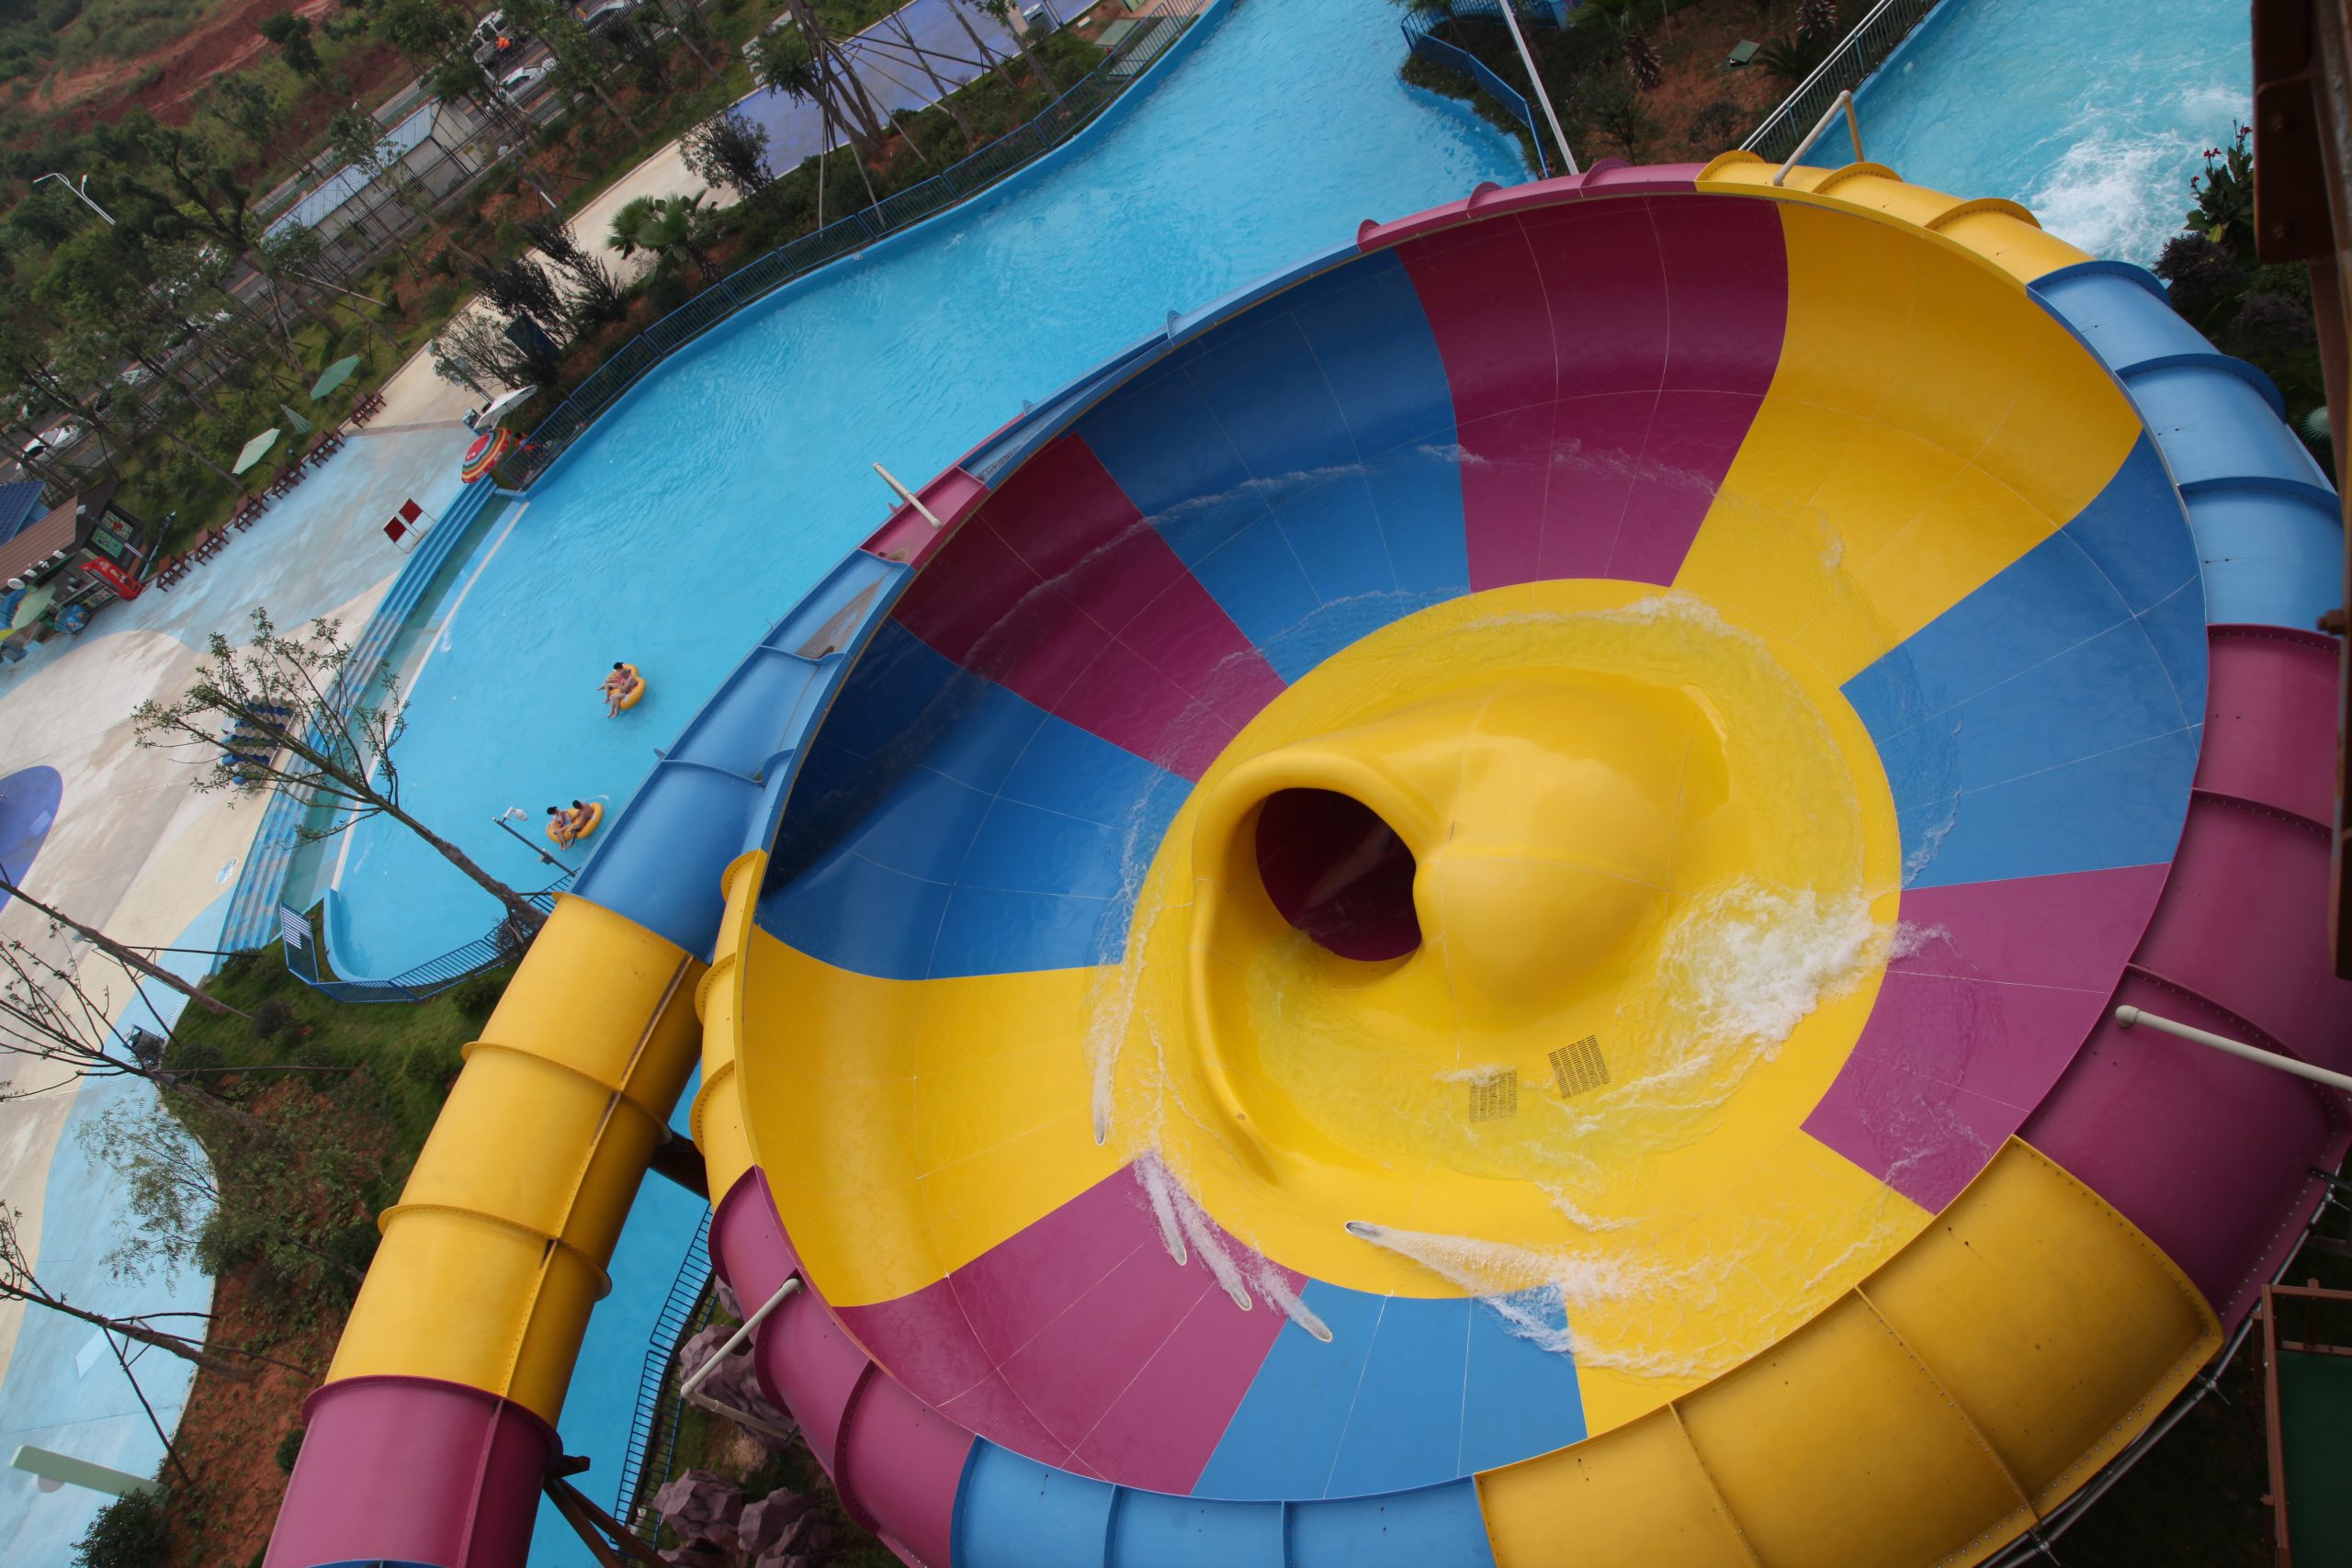 Experience extreme speed stimulation on the world’s longest water slide